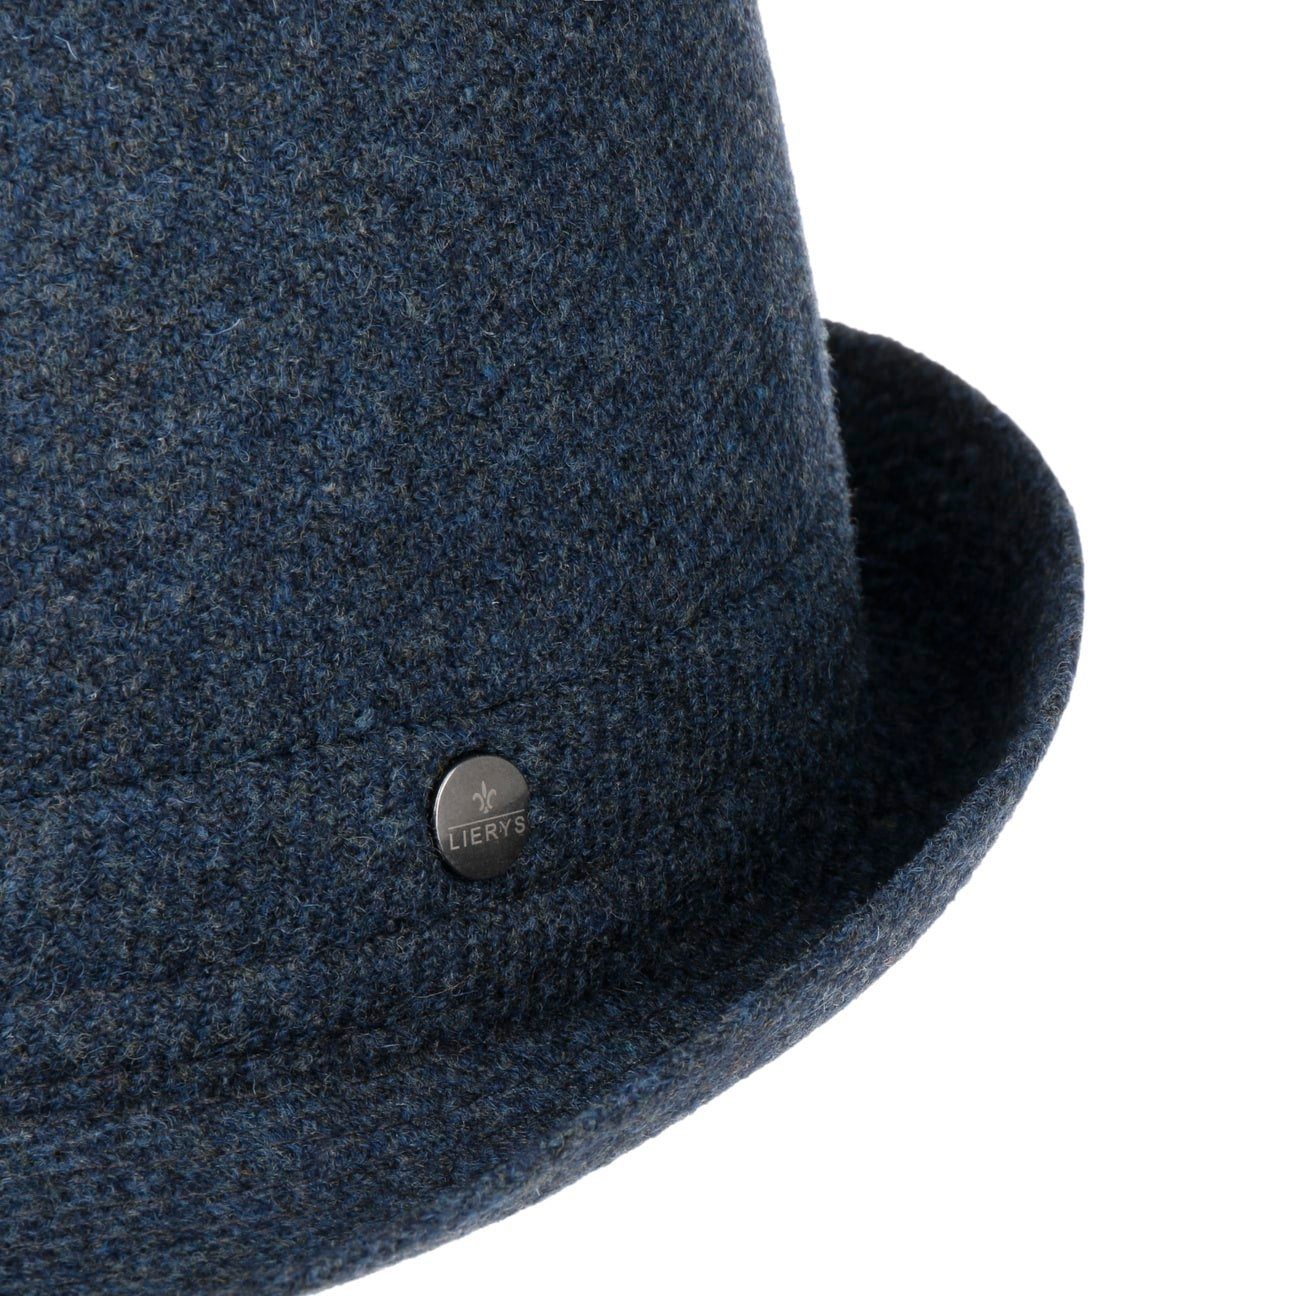 Lierys Futter, mit (1-St) Trilby Wolltrilby blau Made in Italy